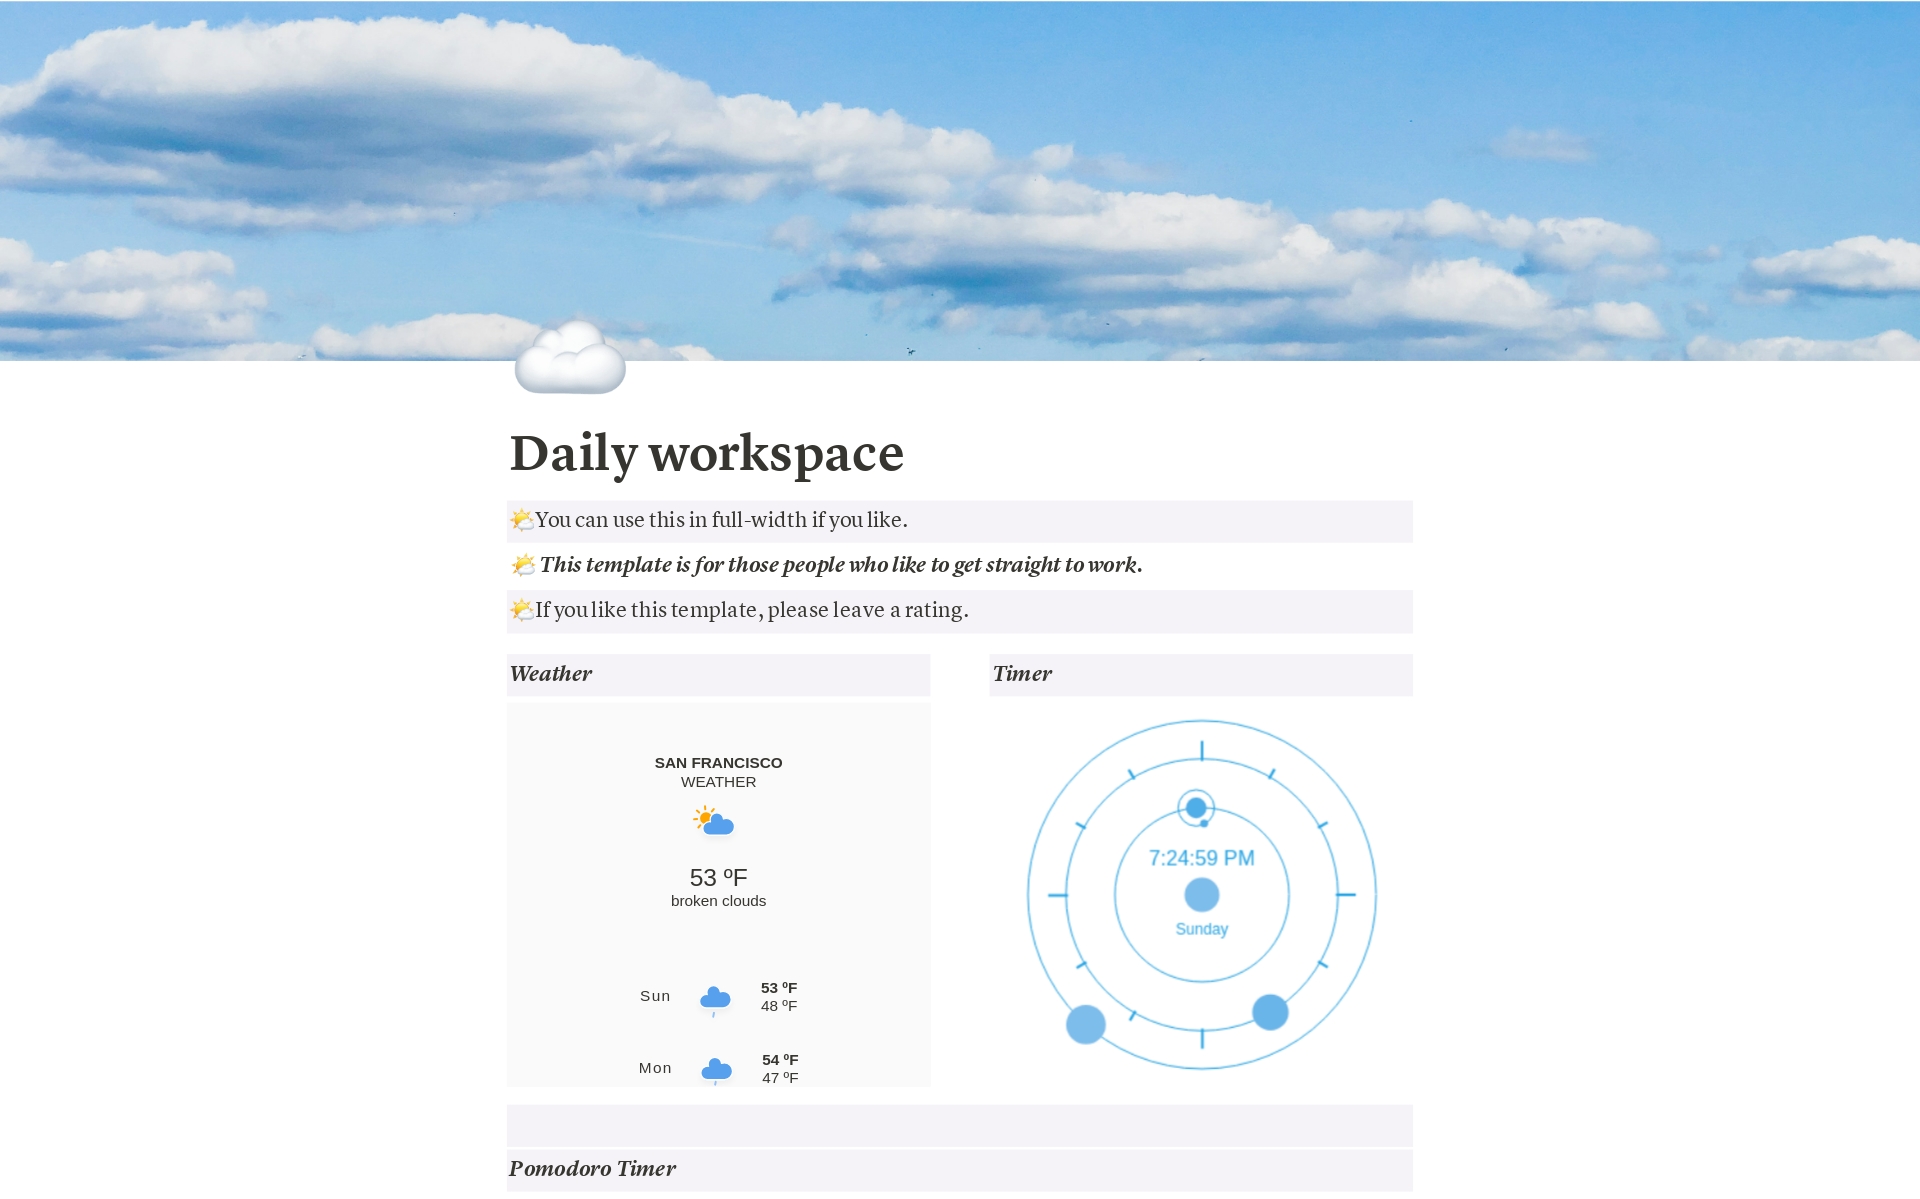 In this Notion template, you get to focus on your daily tasks and zero in on significant things that need your attention. The template simplifies tracking and management and restricts your app hopping to one simple yet powerful workspace. Focus on work and only work.